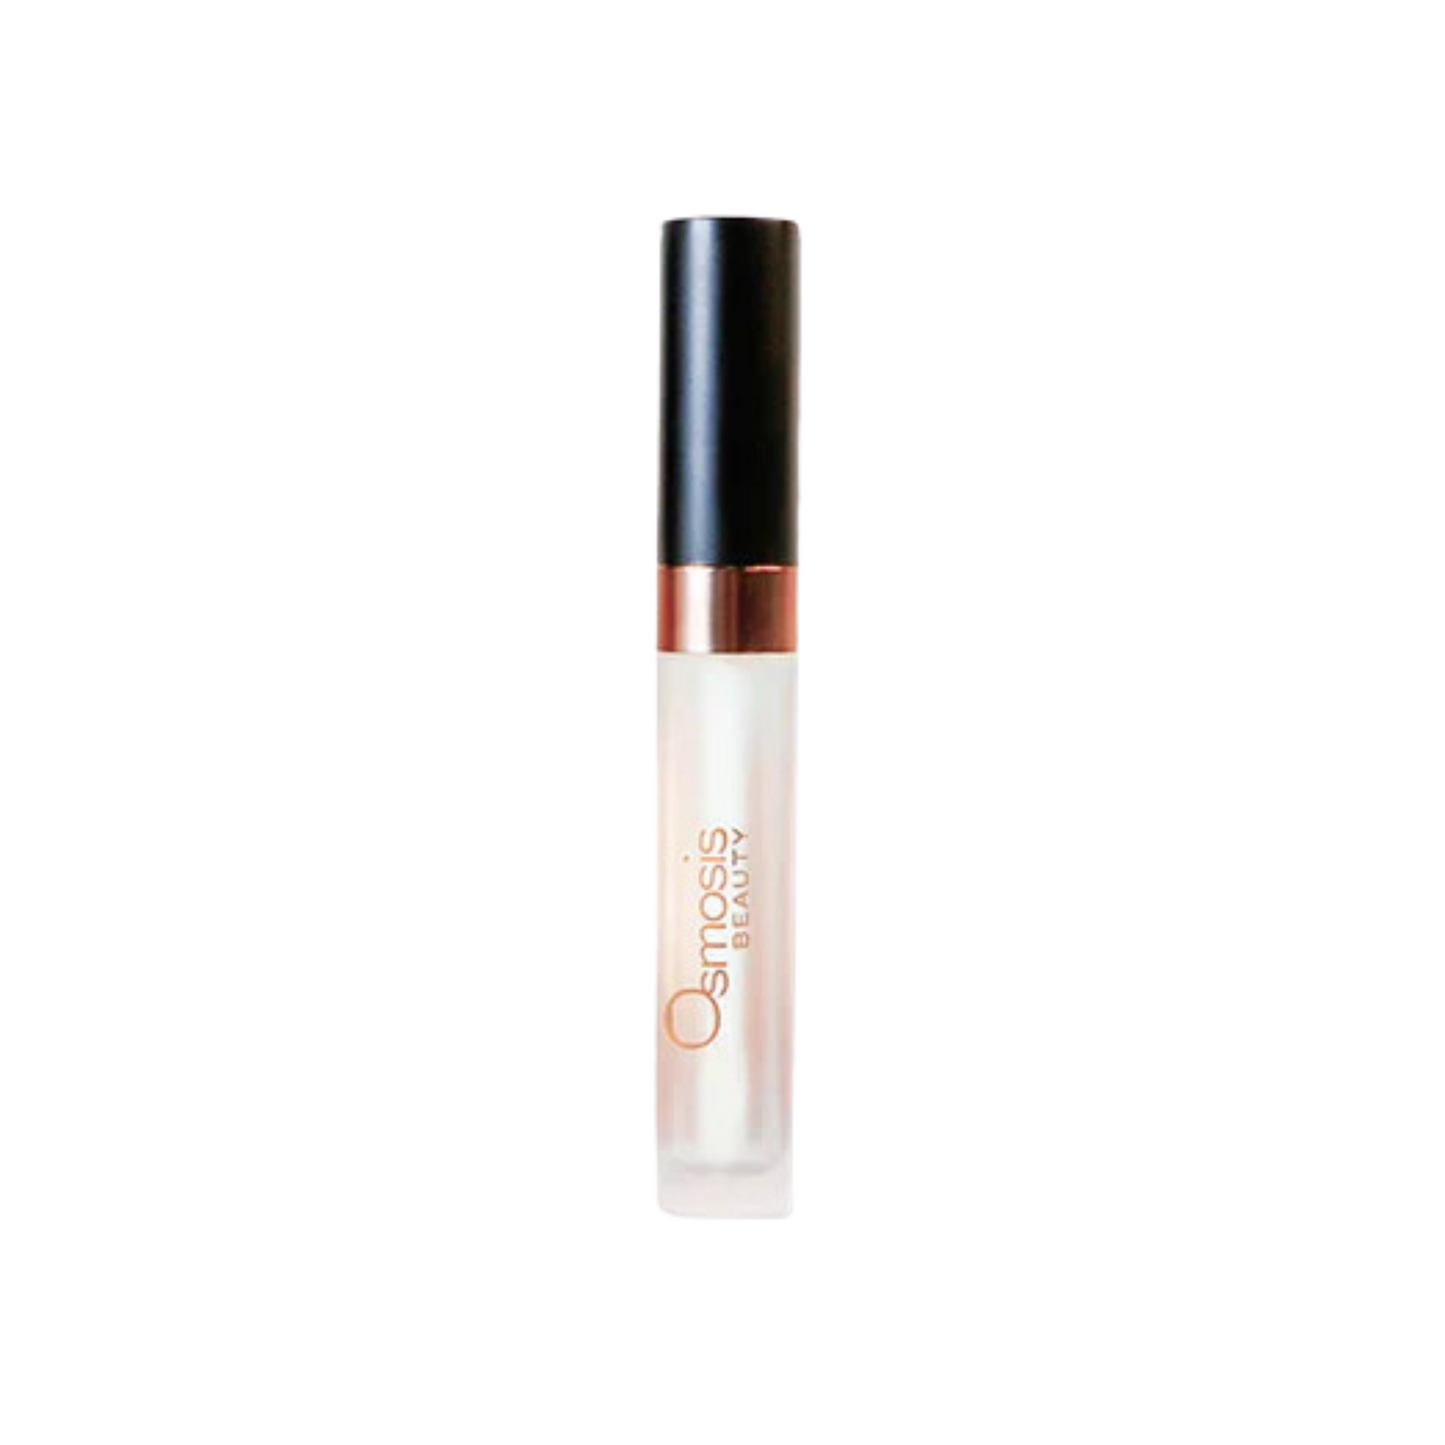 Osmosis Beauty Superfood Lip Oil